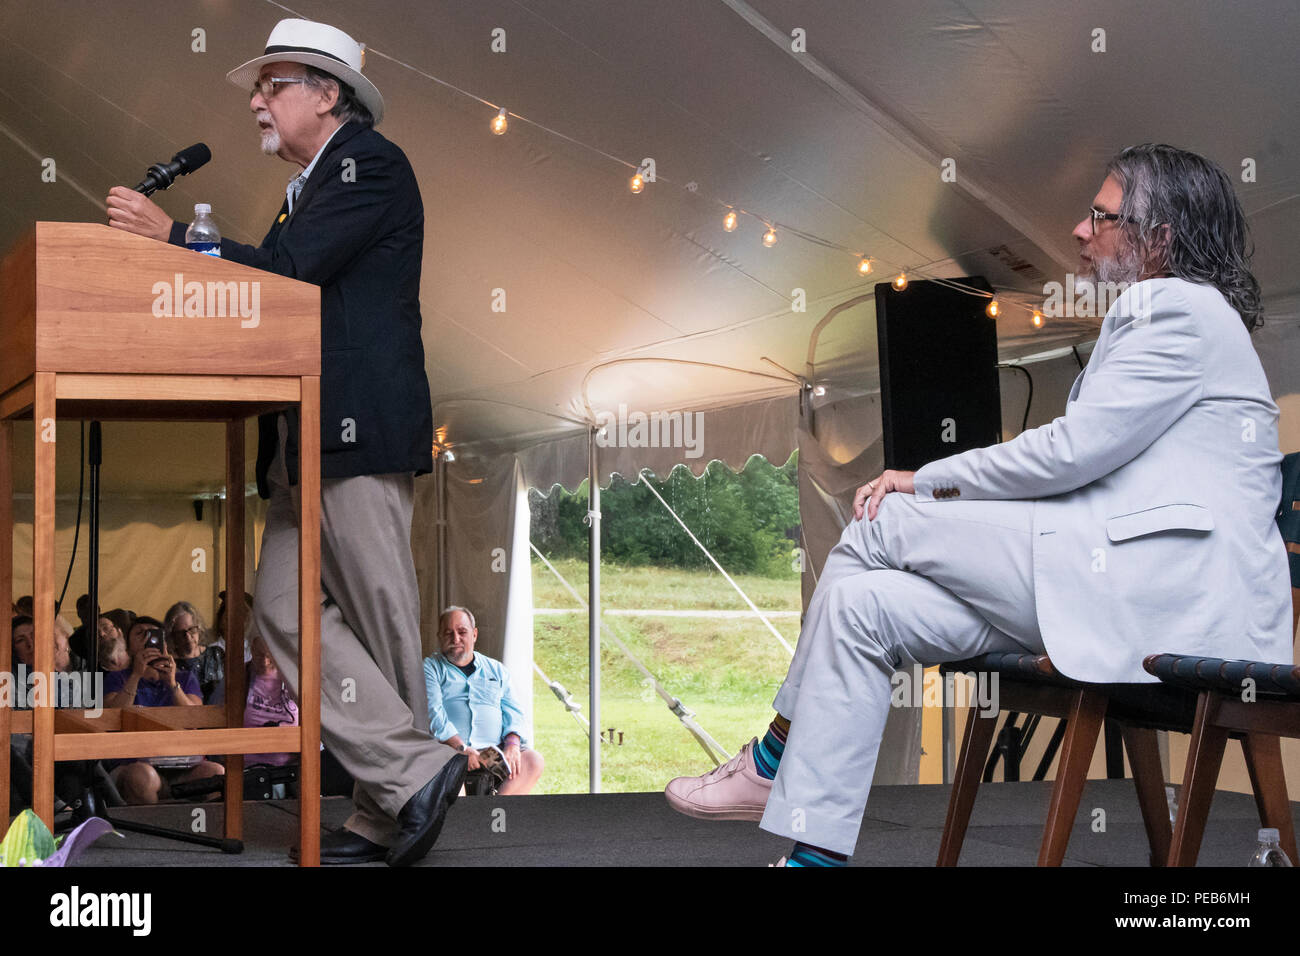 Peterborough, NH (US). 12 April, 2018. Graphic novelist Art Spiegelman, left, the MacDowell Colony's 2018 recipient of the Edward MacDowell Medal, speaks during the award presentation ceremony at the colony in Peterborough, NH (US) while Michael Chabon, the colony's board chairman, listens. Spiegelman, author of the Pulitzer Prize winning graphic novel 'Maus', received the award 'for his contributions to comic art and American culture'. Mike Plotczyk/Alamy Live News Stock Photo